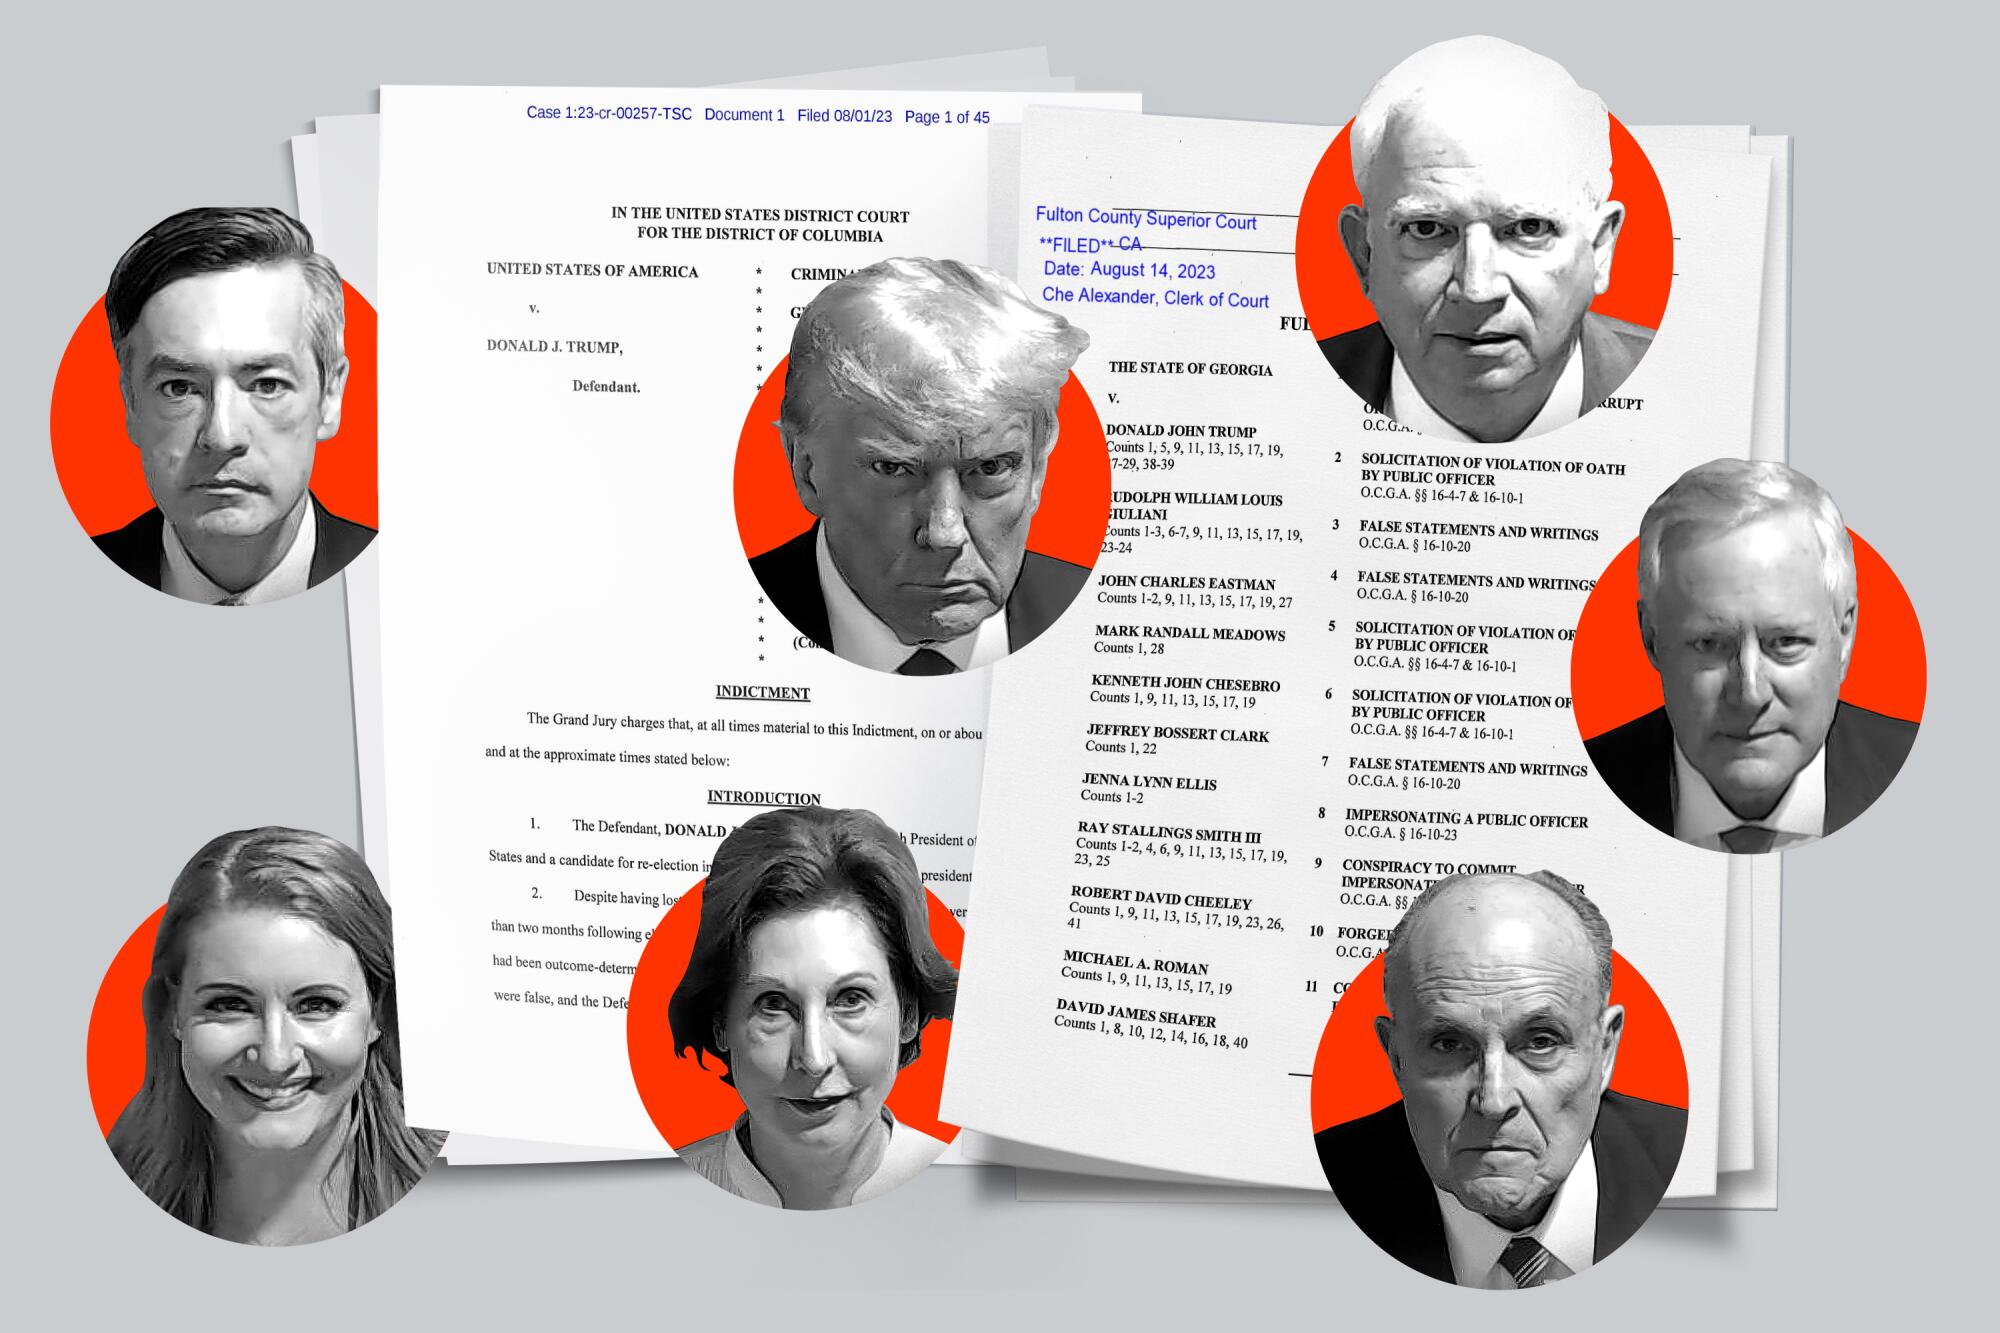 A photo illustration of indictment papers, scattered with mugshots of President Trump and 6 others, each set in a red circle